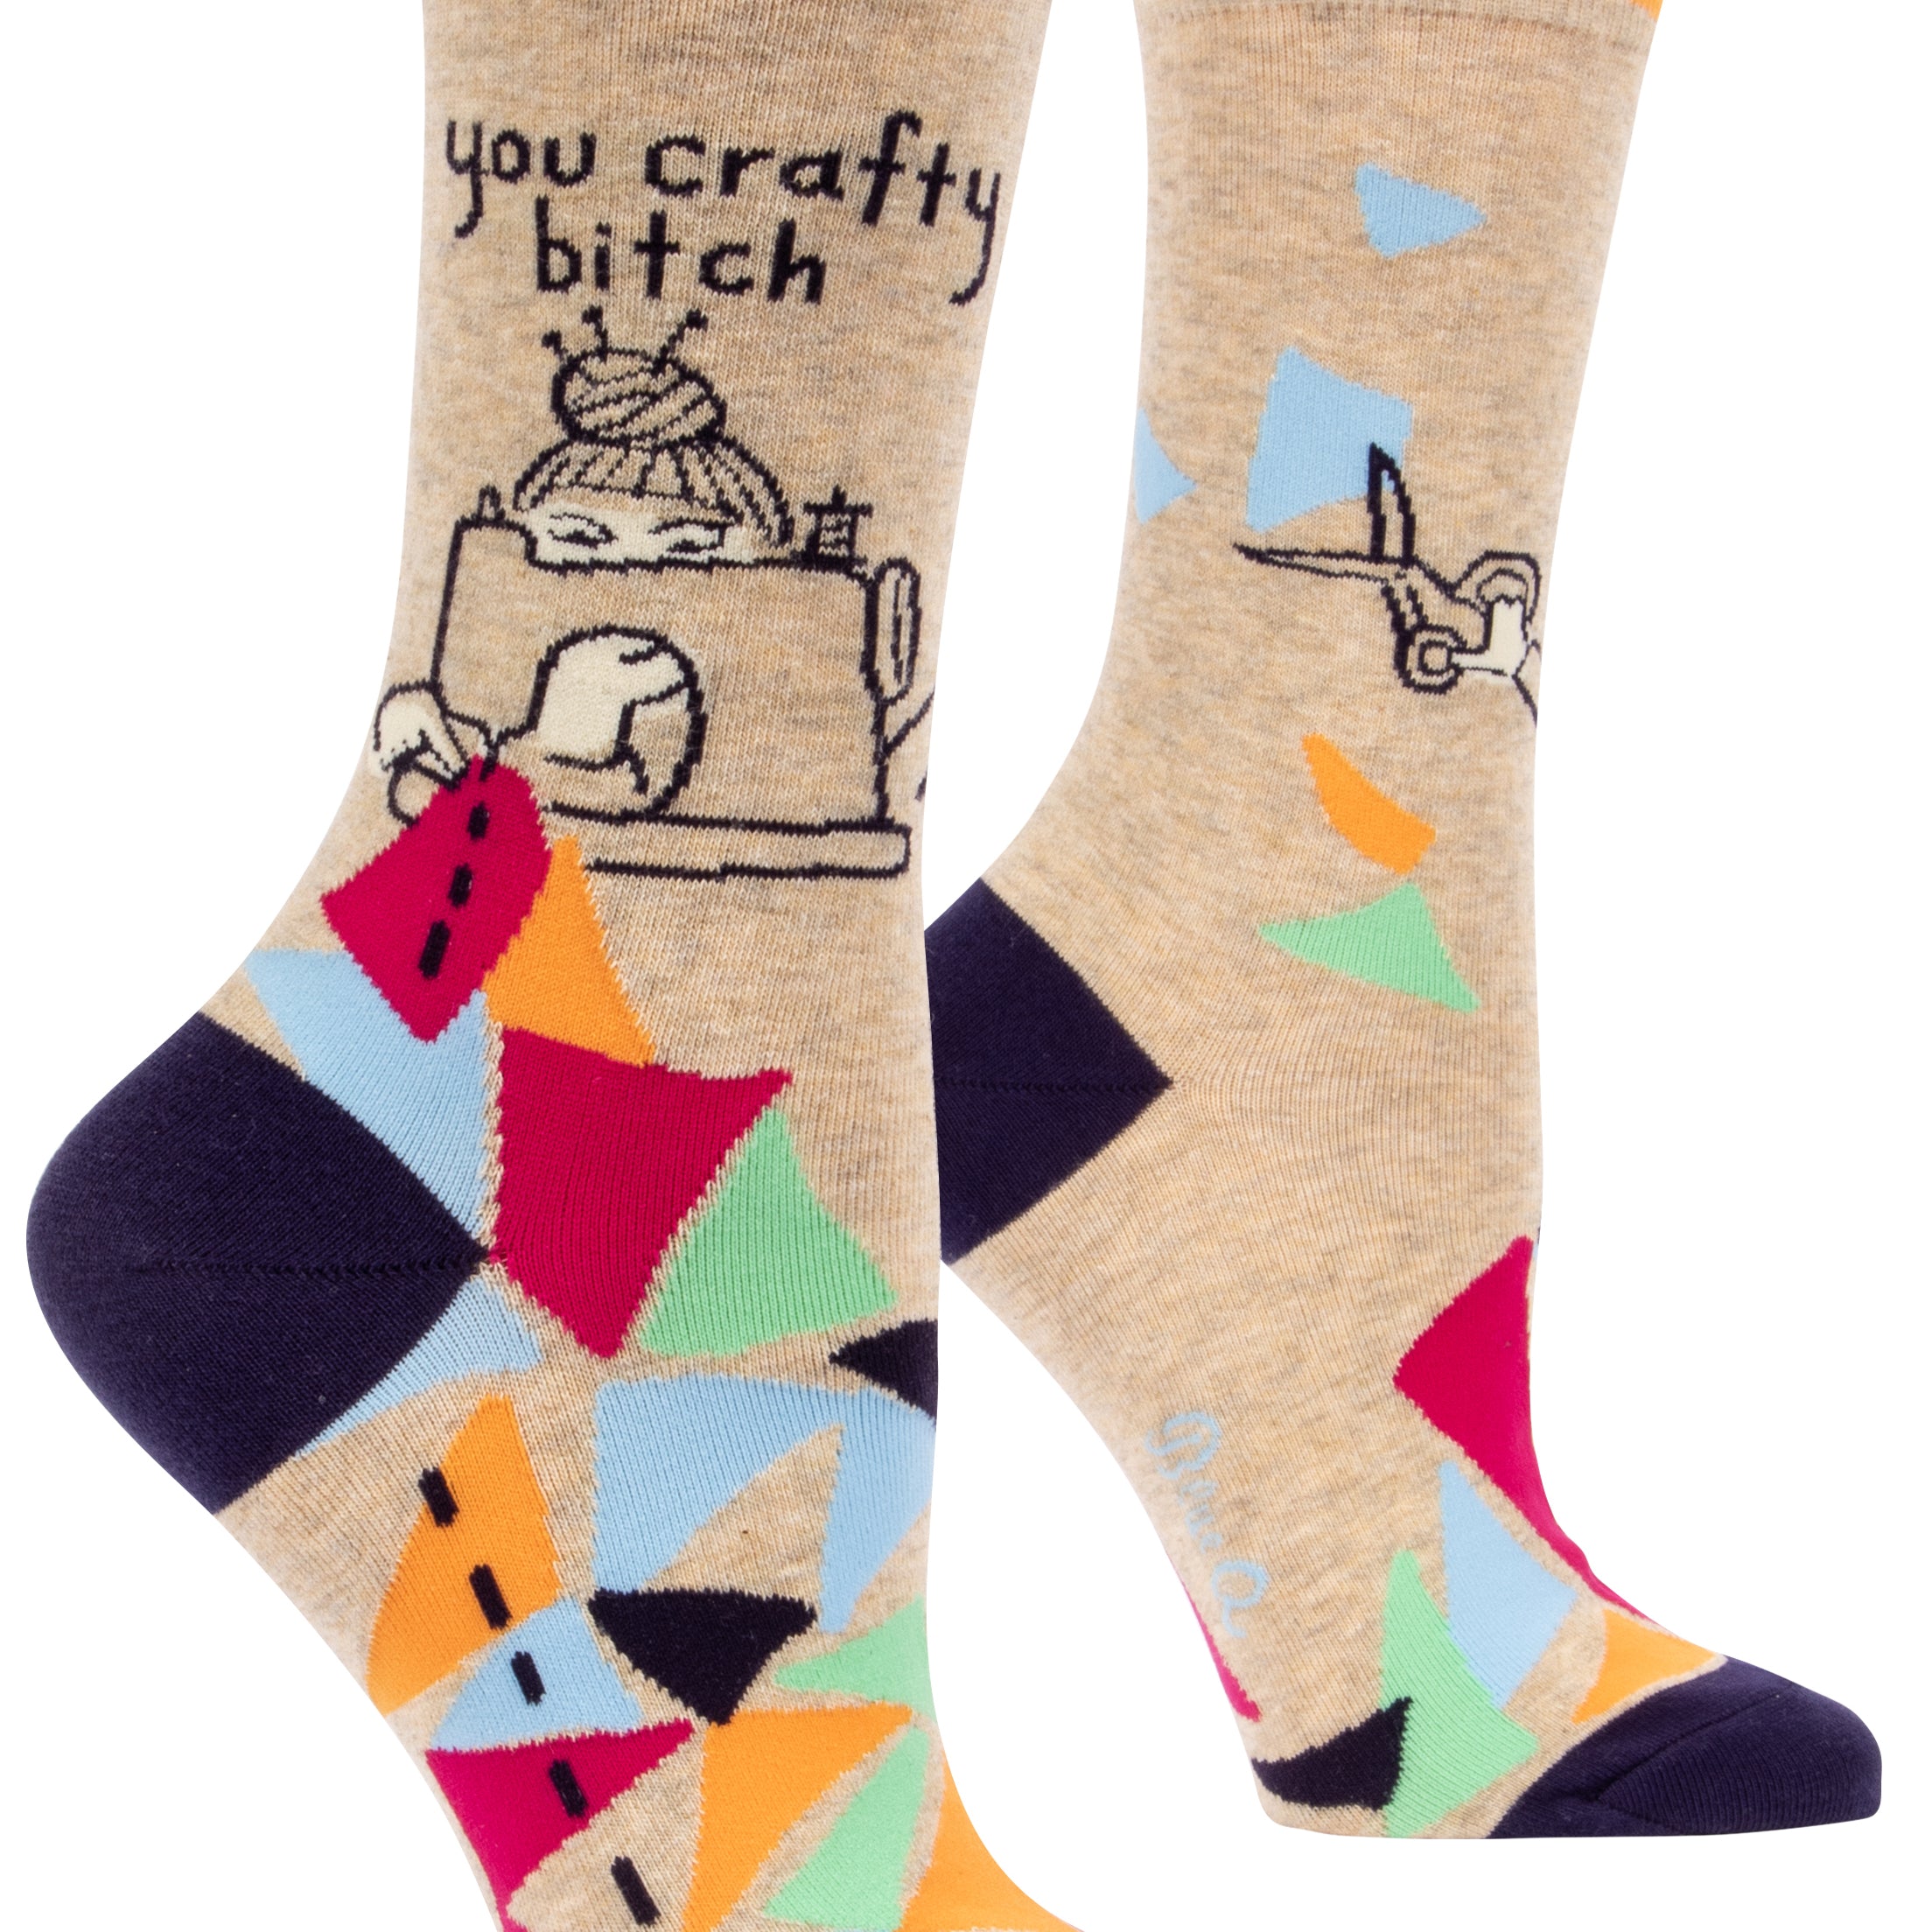 beige socks with multicolour shapes on foot with a cartoon of someone at sewing machine and above it says you crafty bitch